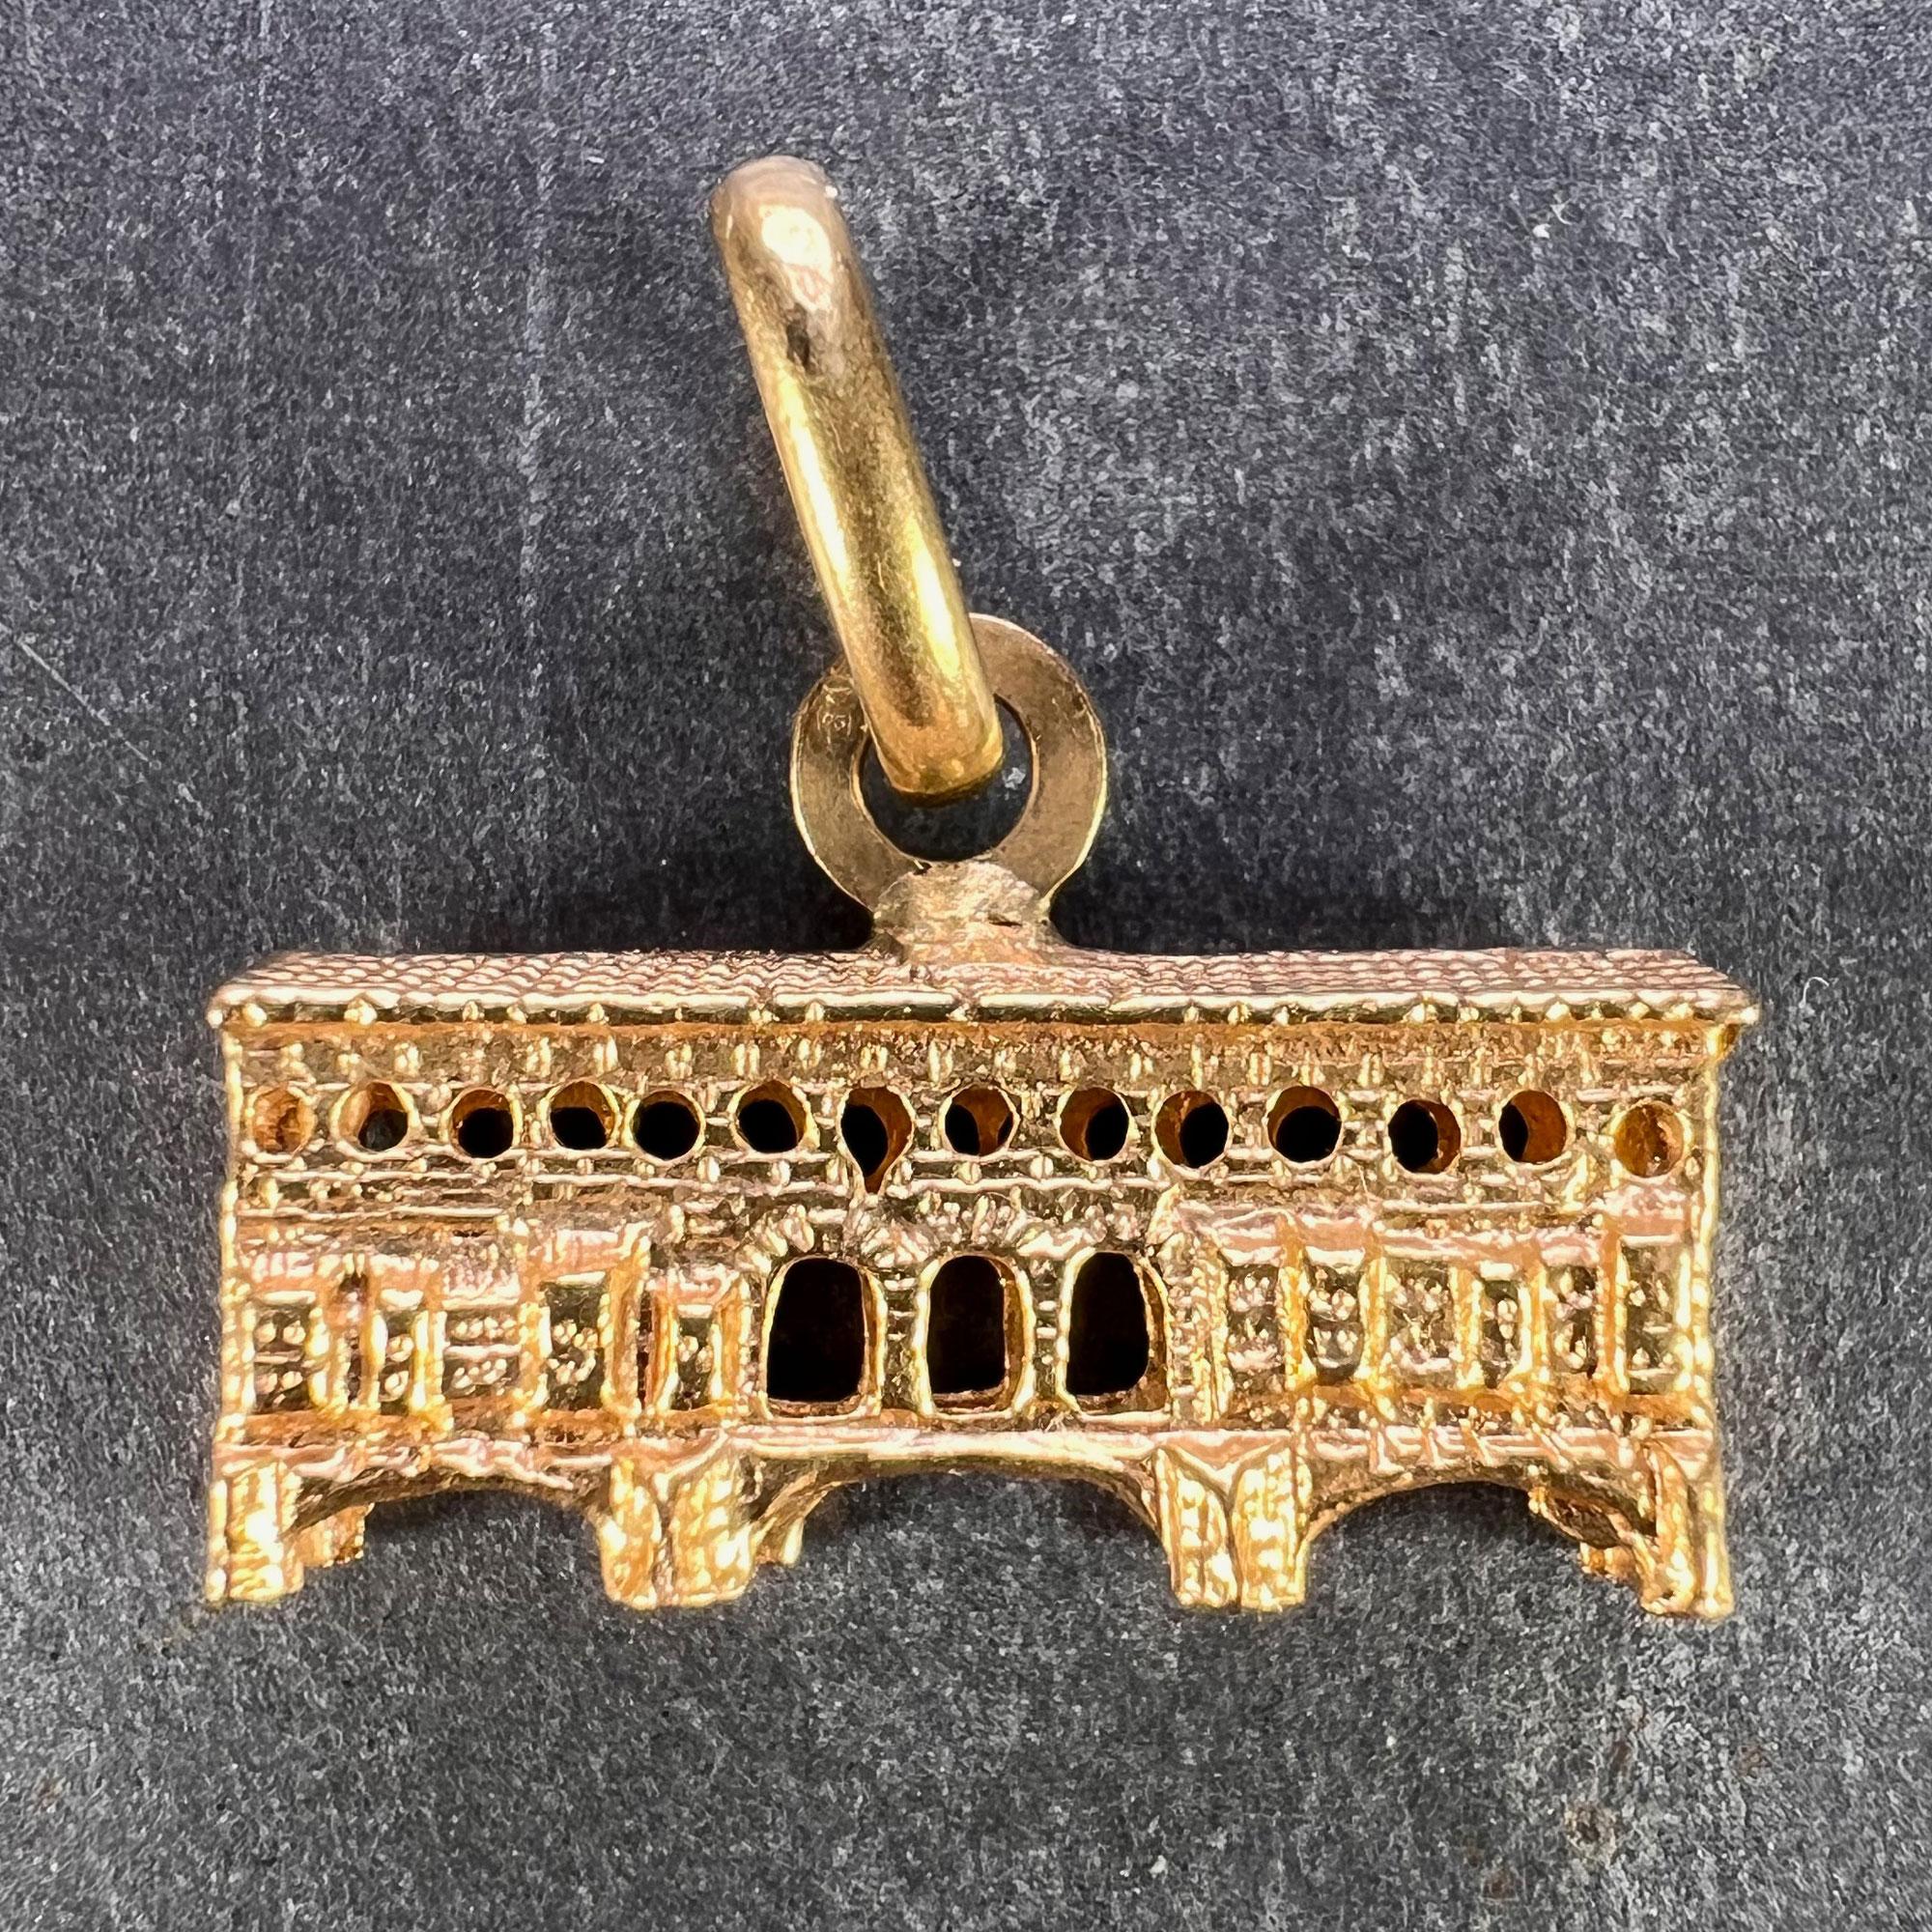 An Italian 18 karat (18K) gold charm pendant designed as the Ponte Vecchio Bridge in Florence, Italy. Marked 750 for 18 karat gold with the Italian maker's mark 247VI for Domenico Ganazzin, and stamped with the French import mark for 18 karat